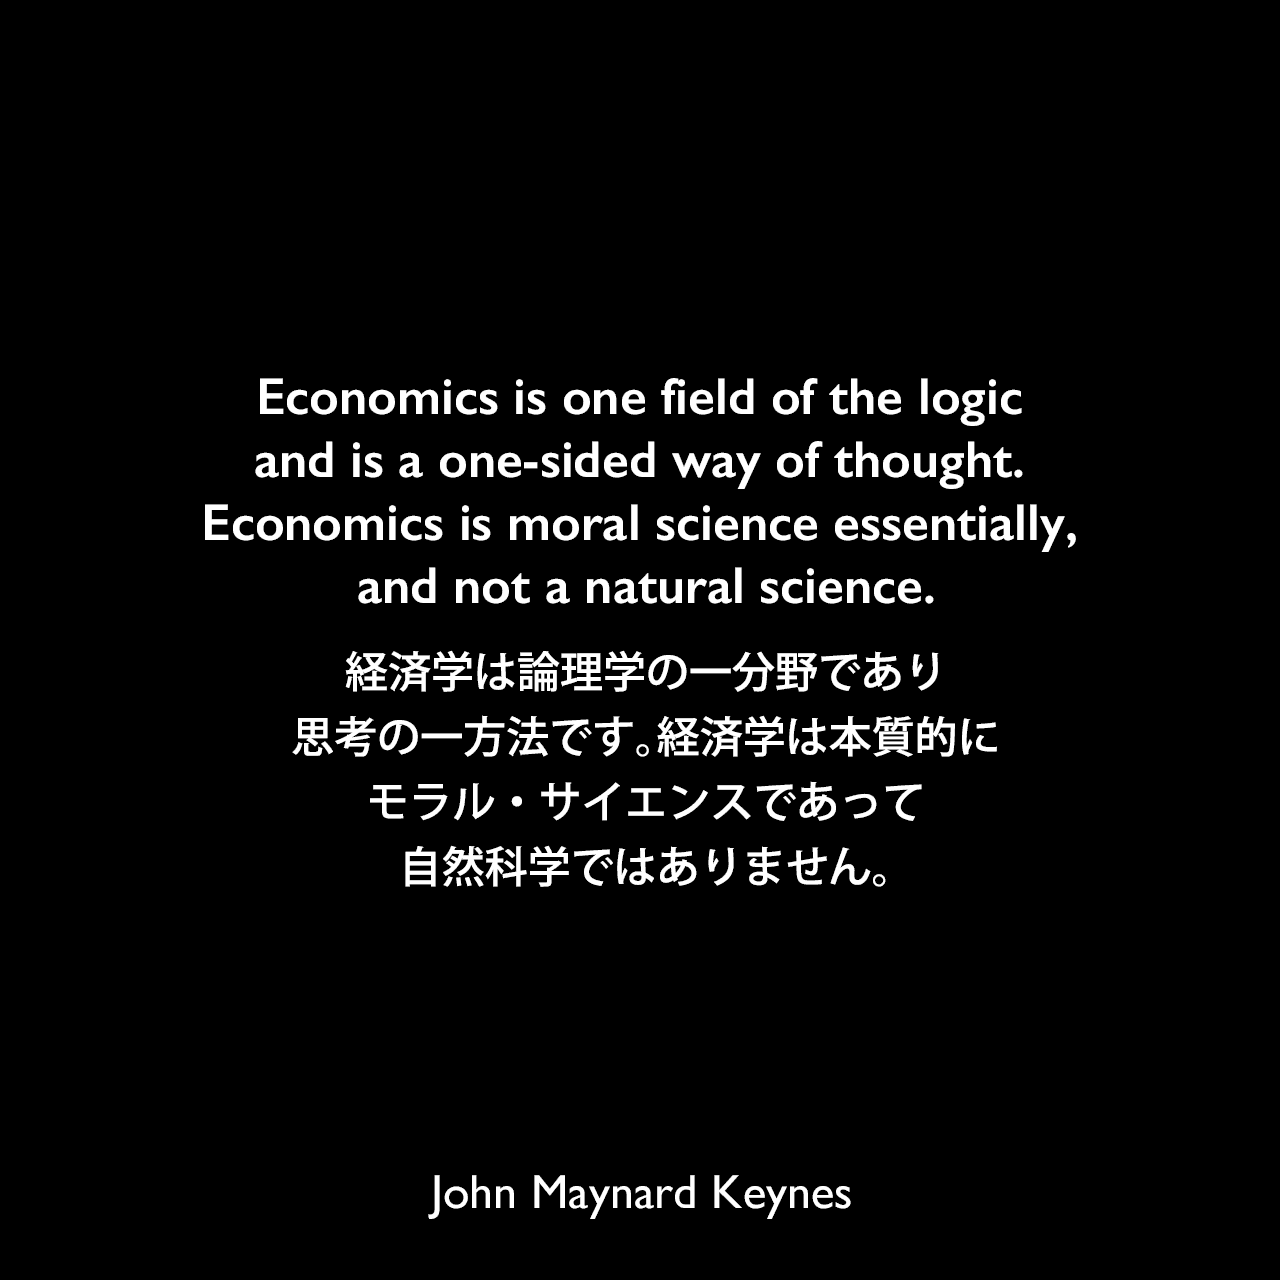 Economics is one field of the logic and is a one-sided way of thought. Economics is moral science essentially, and not a natural science.経済学は論理学の一分野であり、思考の一方法です。経済学は本質的にモラル・サイエンスであって自然科学ではありません。John Maynard Keynes